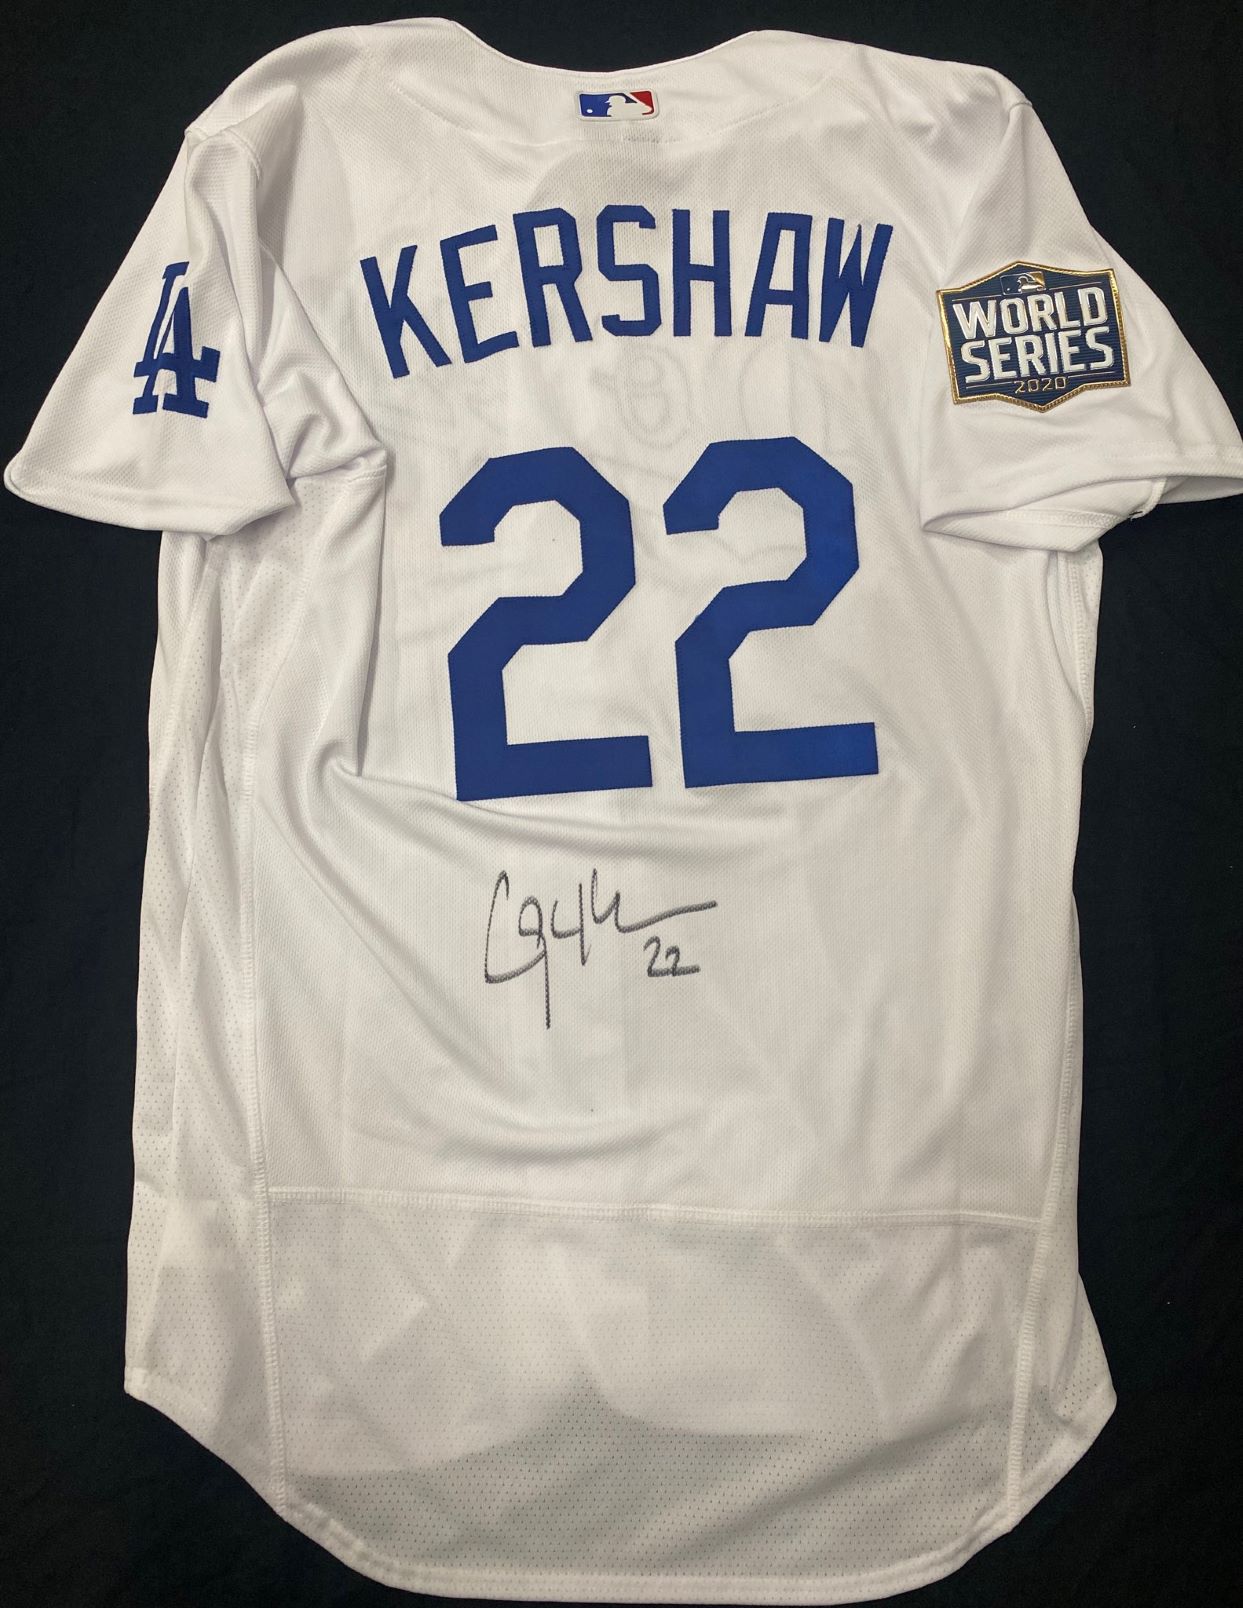 Clayton Kershaw Autographed 2020 World Series Jersey - Art of the Game